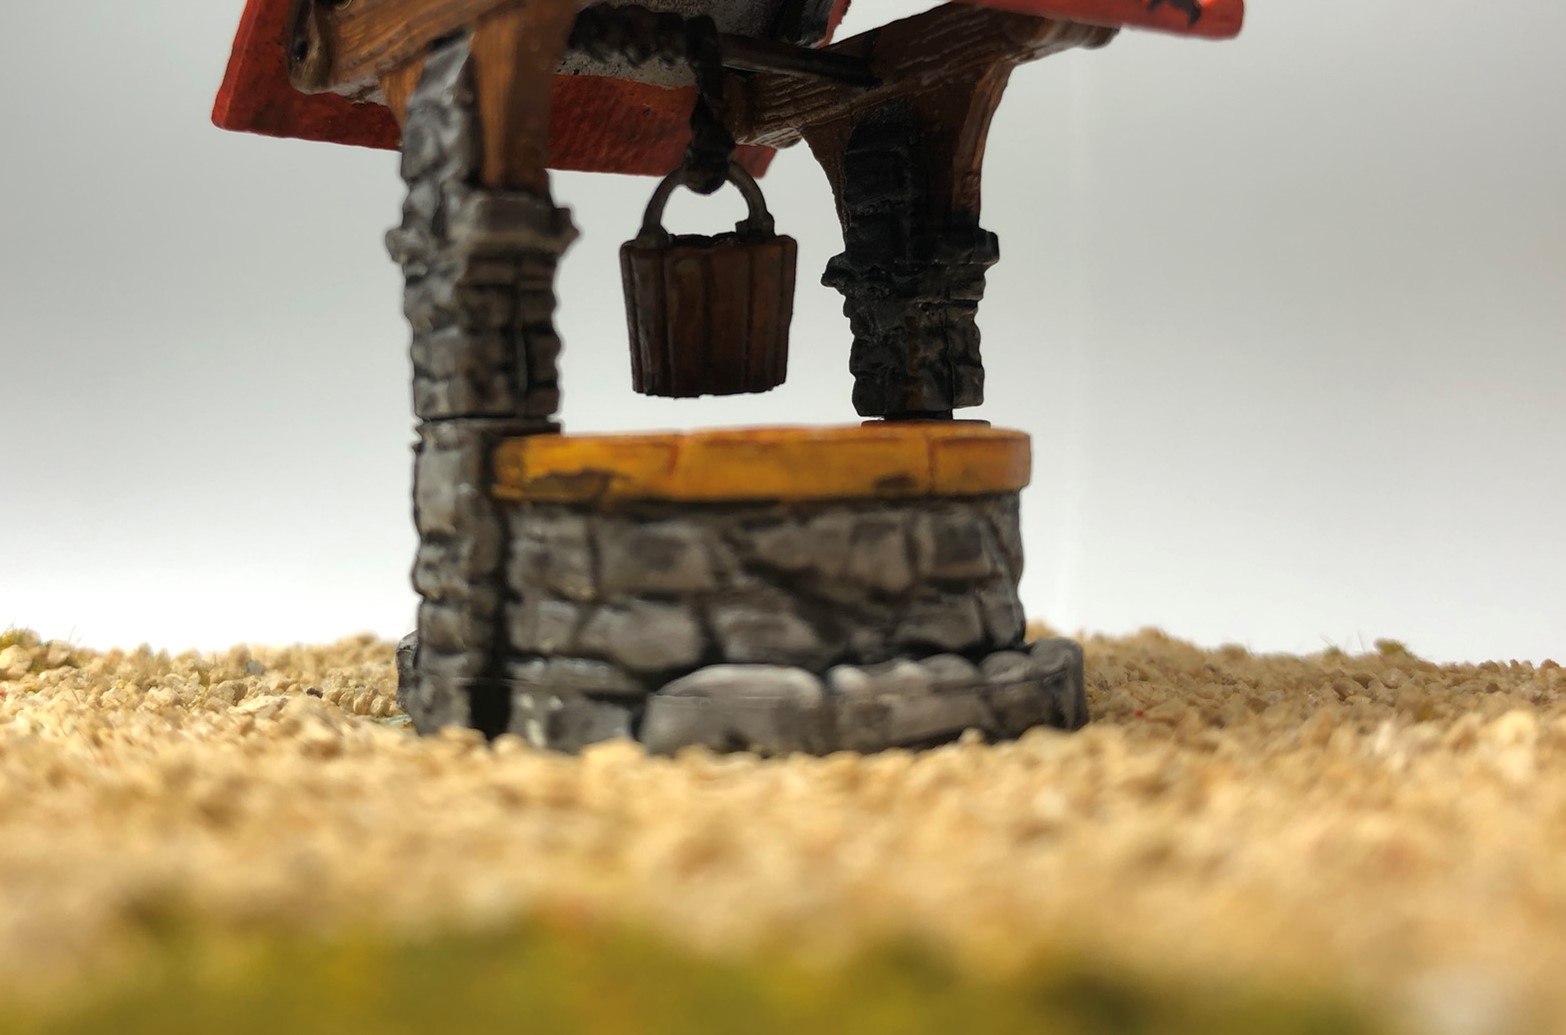 Scenery: Town Well #1